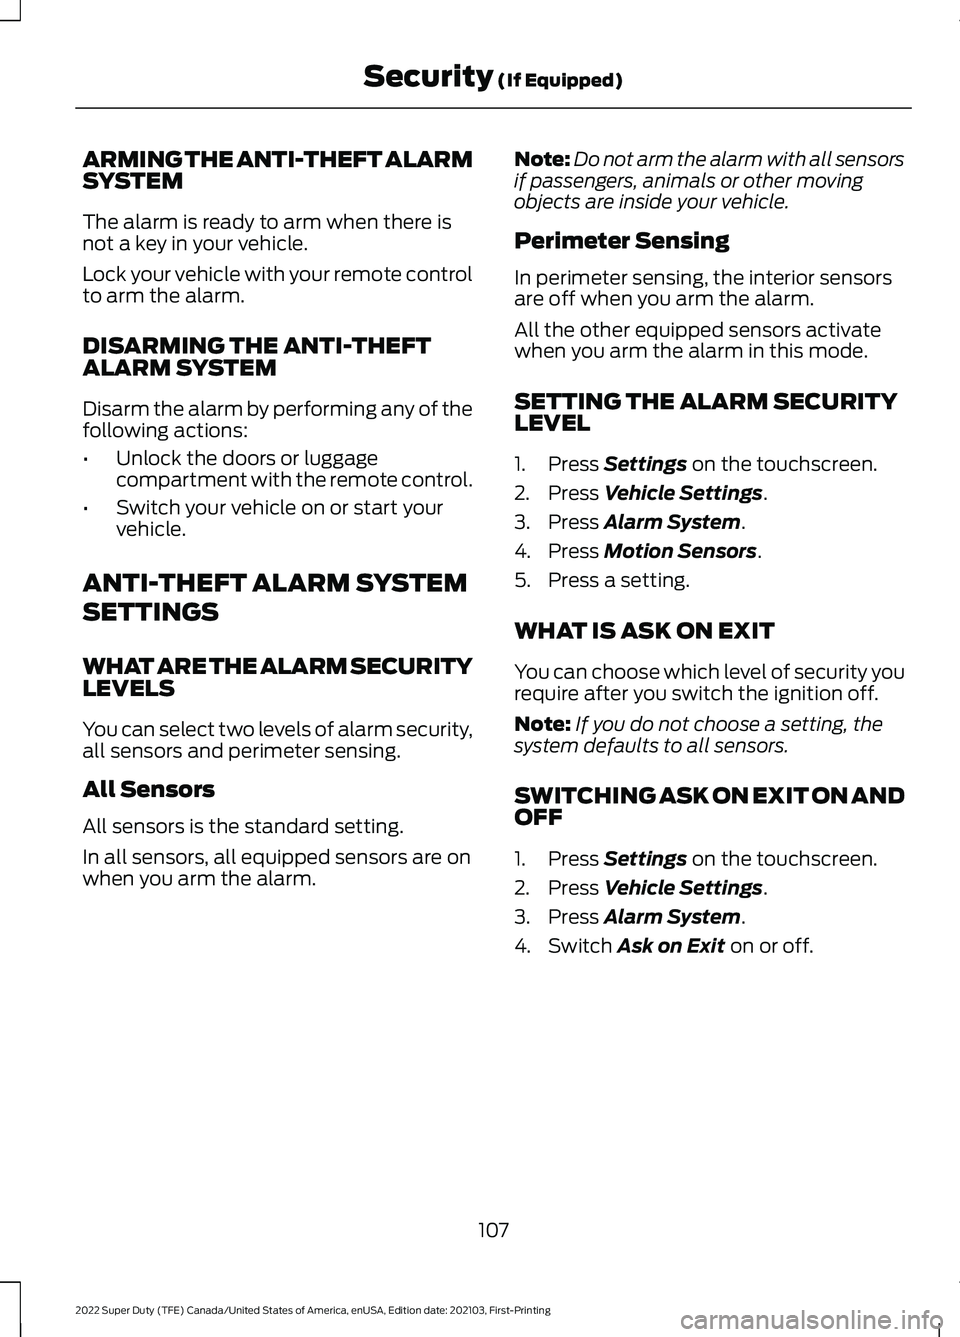 FORD F-550 2022  Owners Manual ARMING THE ANTI-THEFT ALARM
SYSTEM
The alarm is ready to arm when there is
not a key in your vehicle.
Lock your vehicle with your remote control
to arm the alarm.
DISARMING THE ANTI-THEFT
ALARM SYSTEM